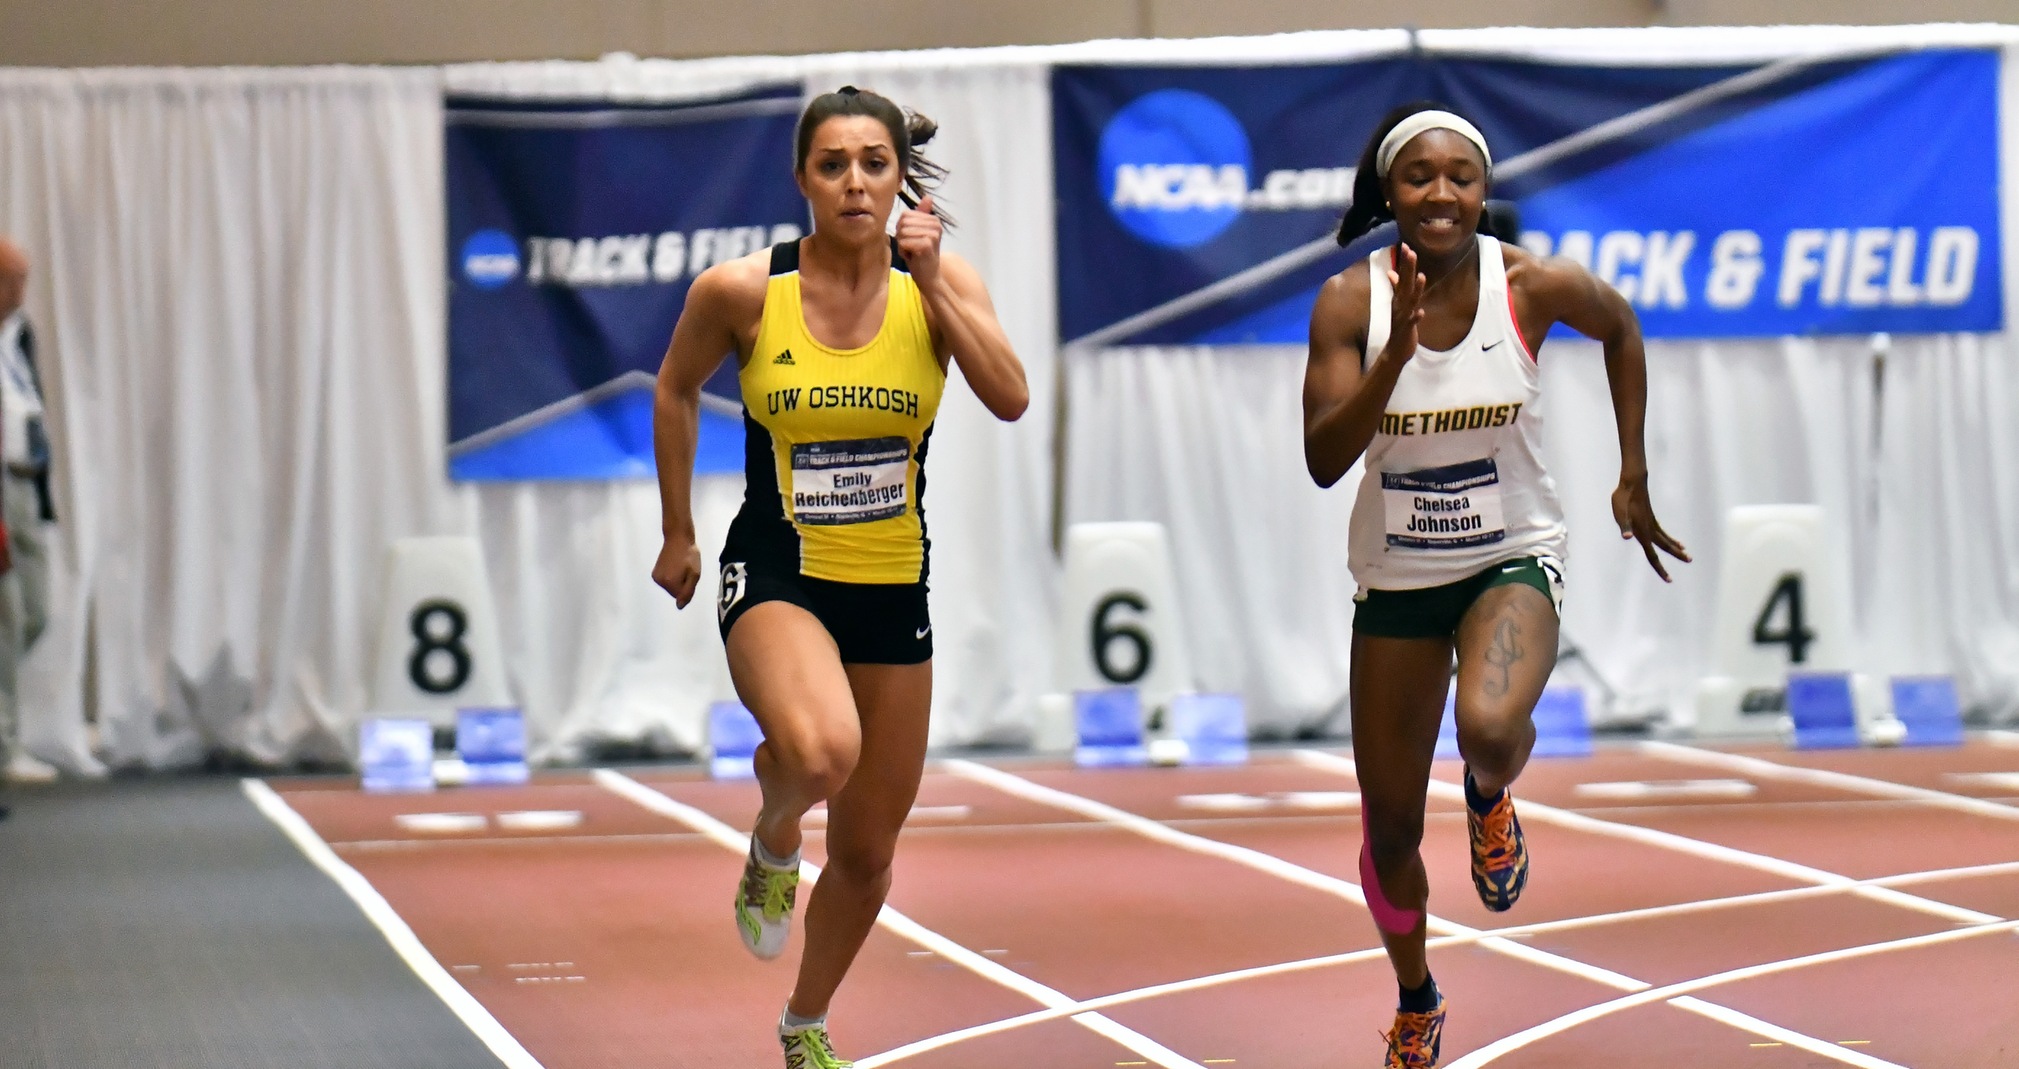 Emily Reichenberger finished eighth in the 60- and 12th in the 200-meter dashes at this year's NCAA Championship.